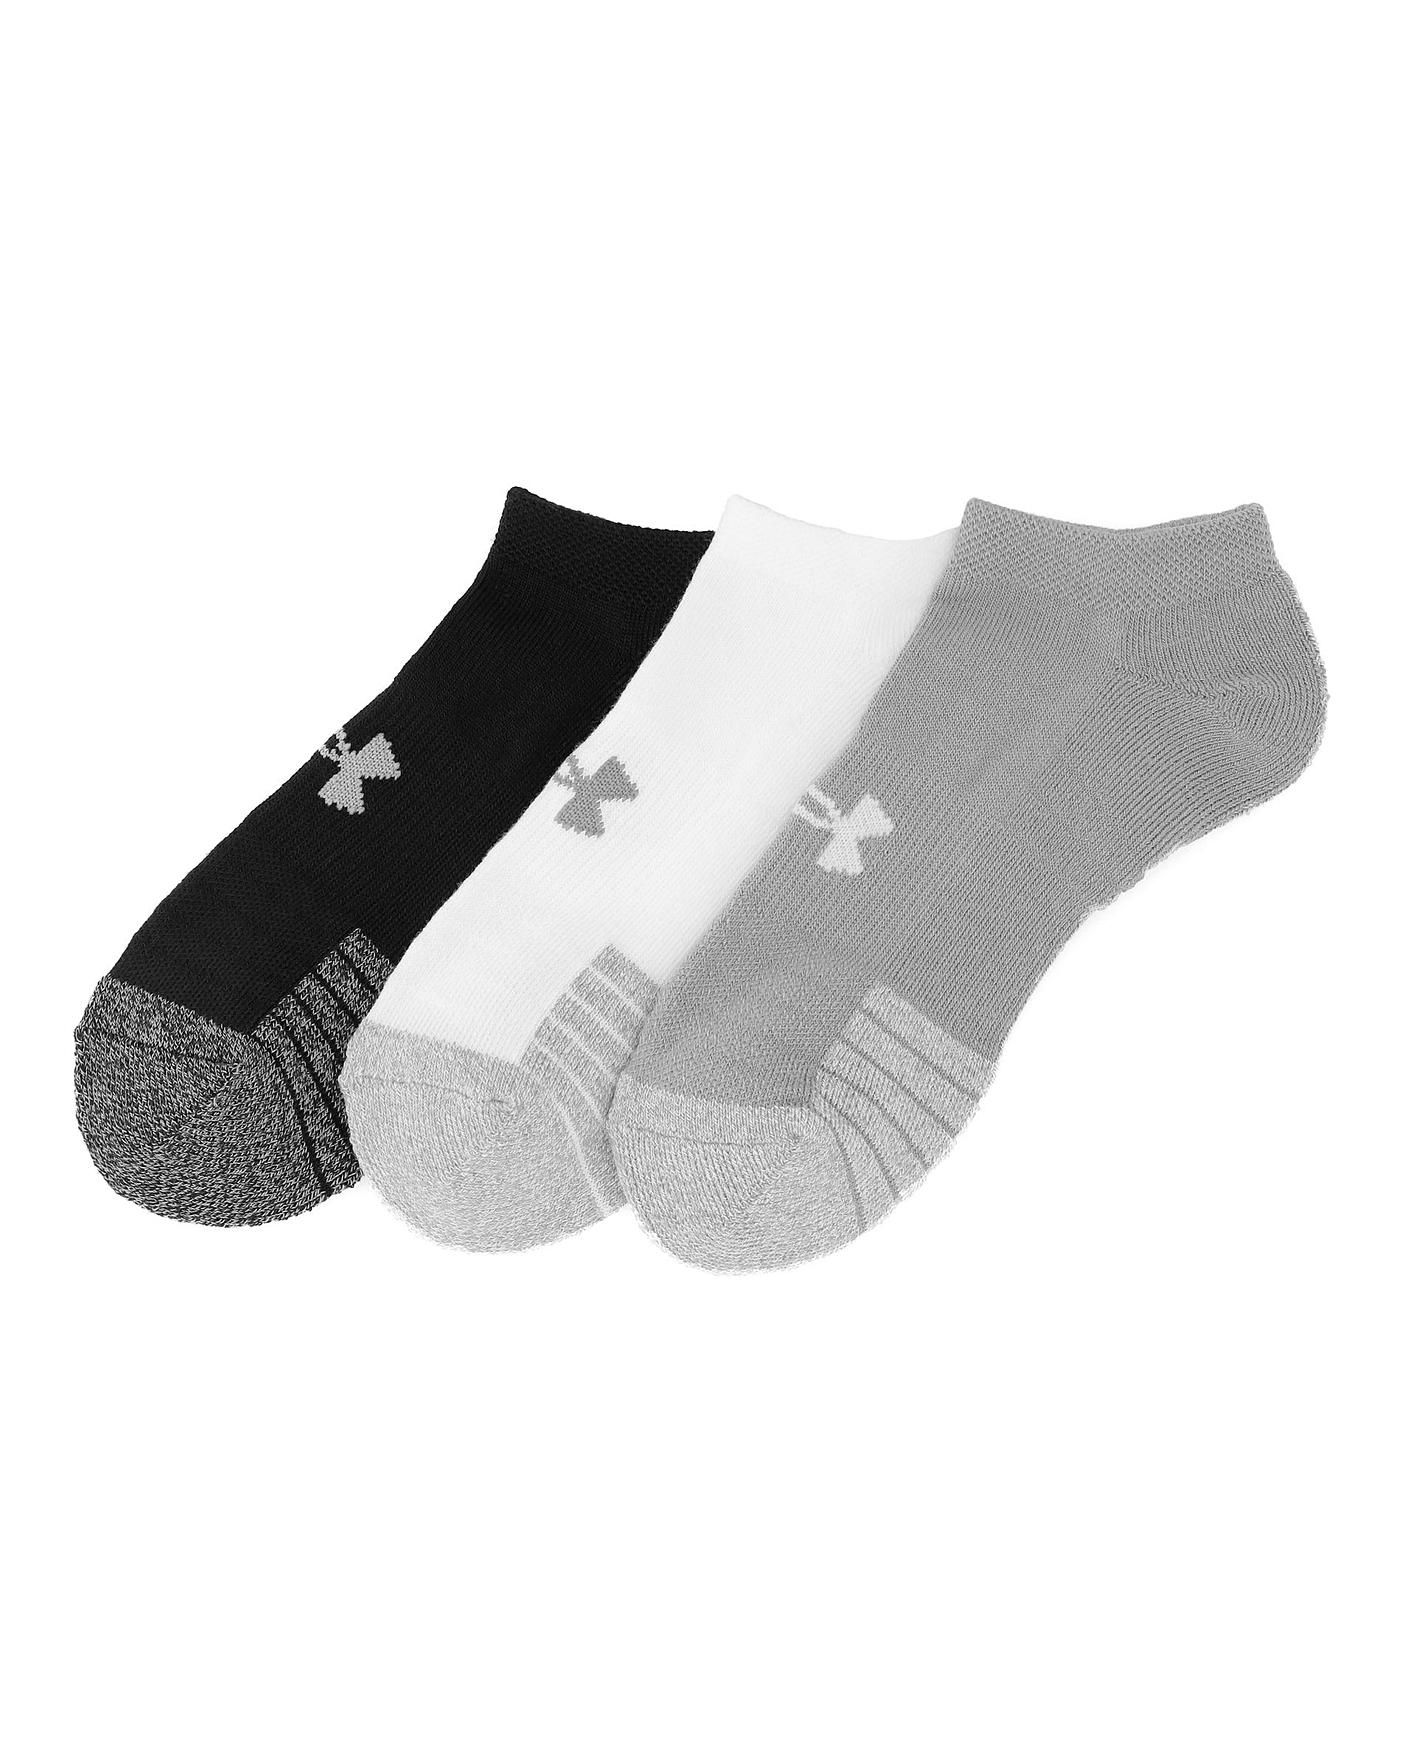 who sells under armour socks